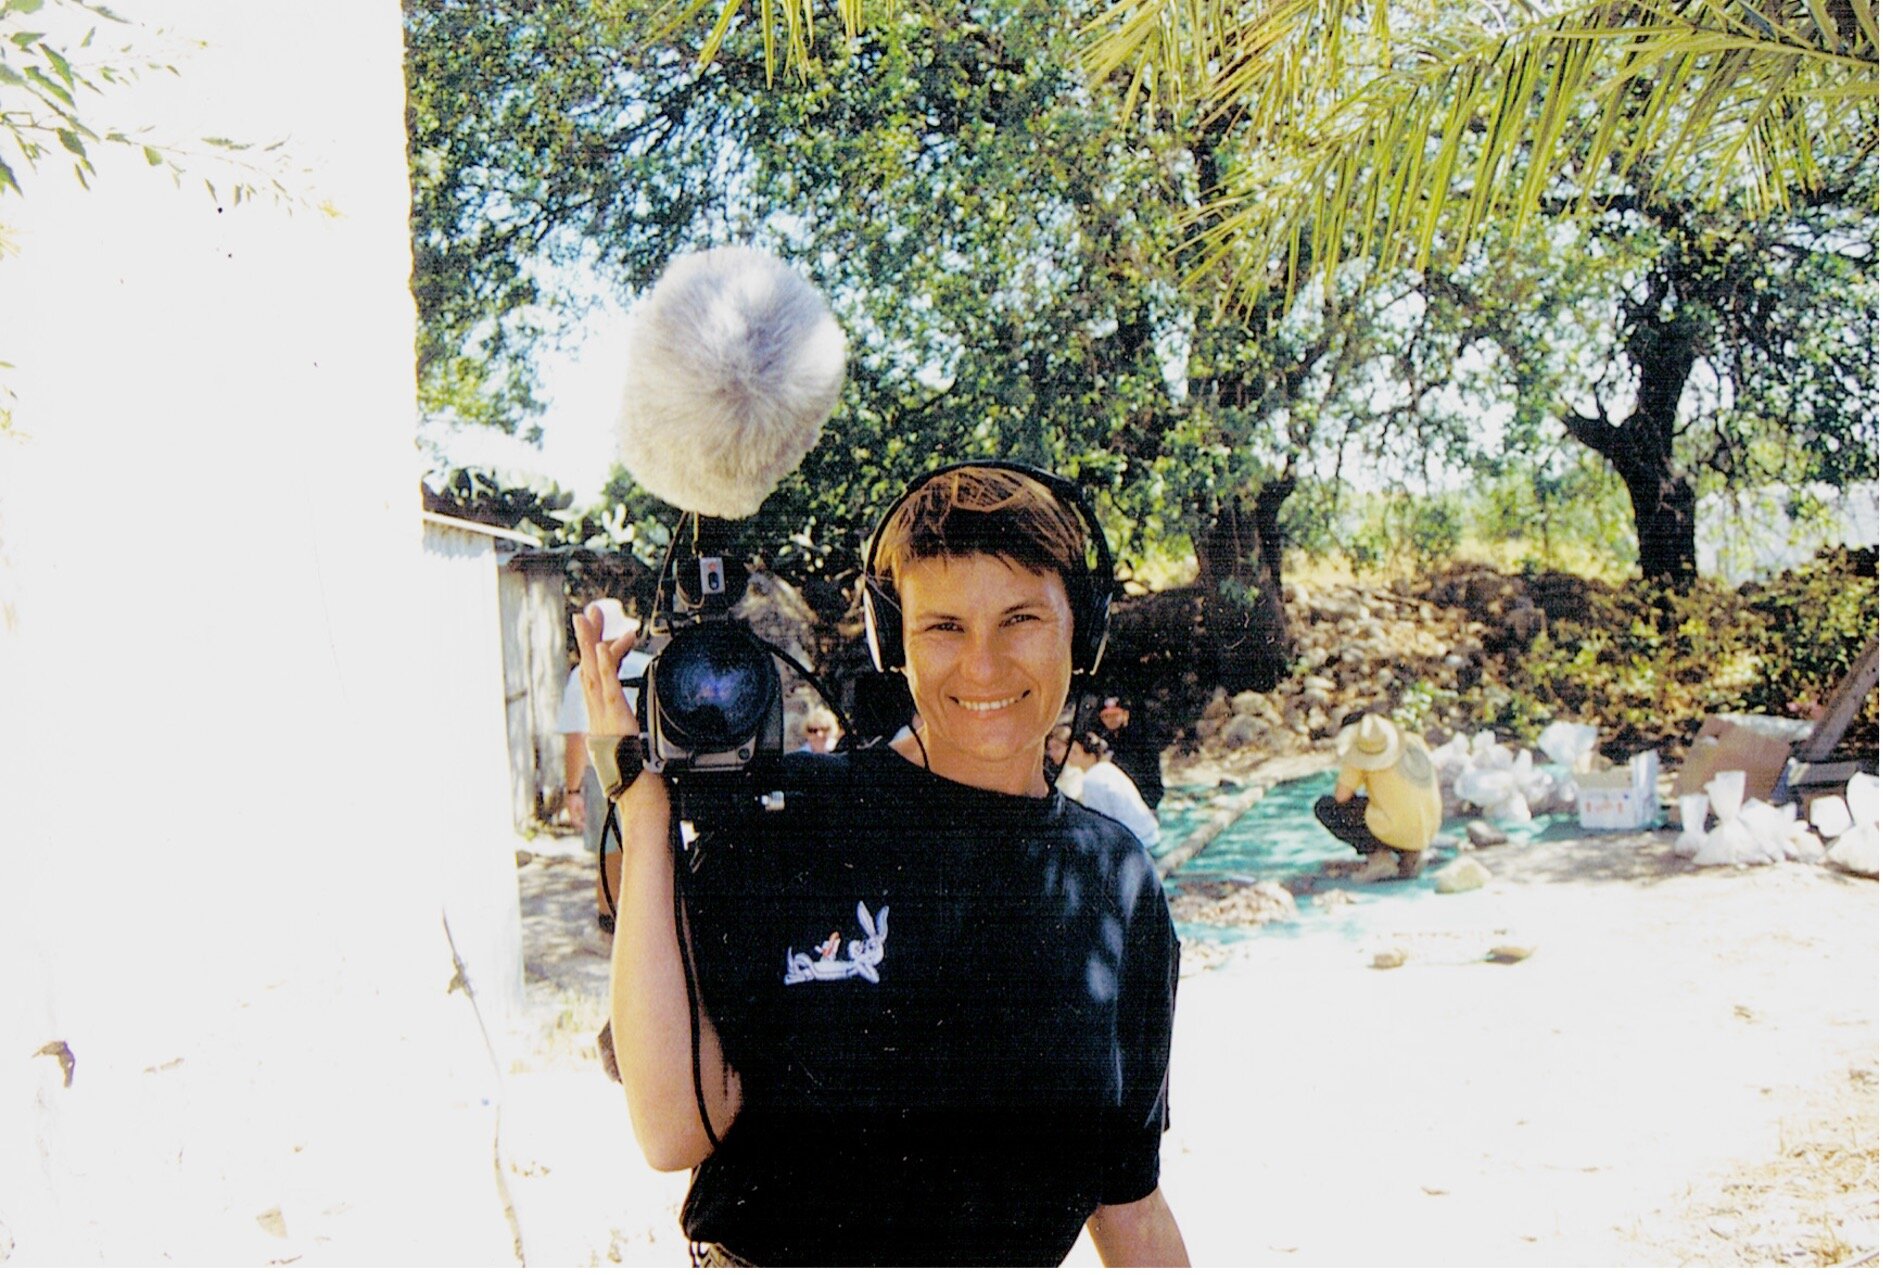  Artist  Amanda Dusting  on site with video camera in the early days of the project. Dusting has documented both the archaeological and anthropological processes of the excavation through the media of digital videoing over many years of her participa